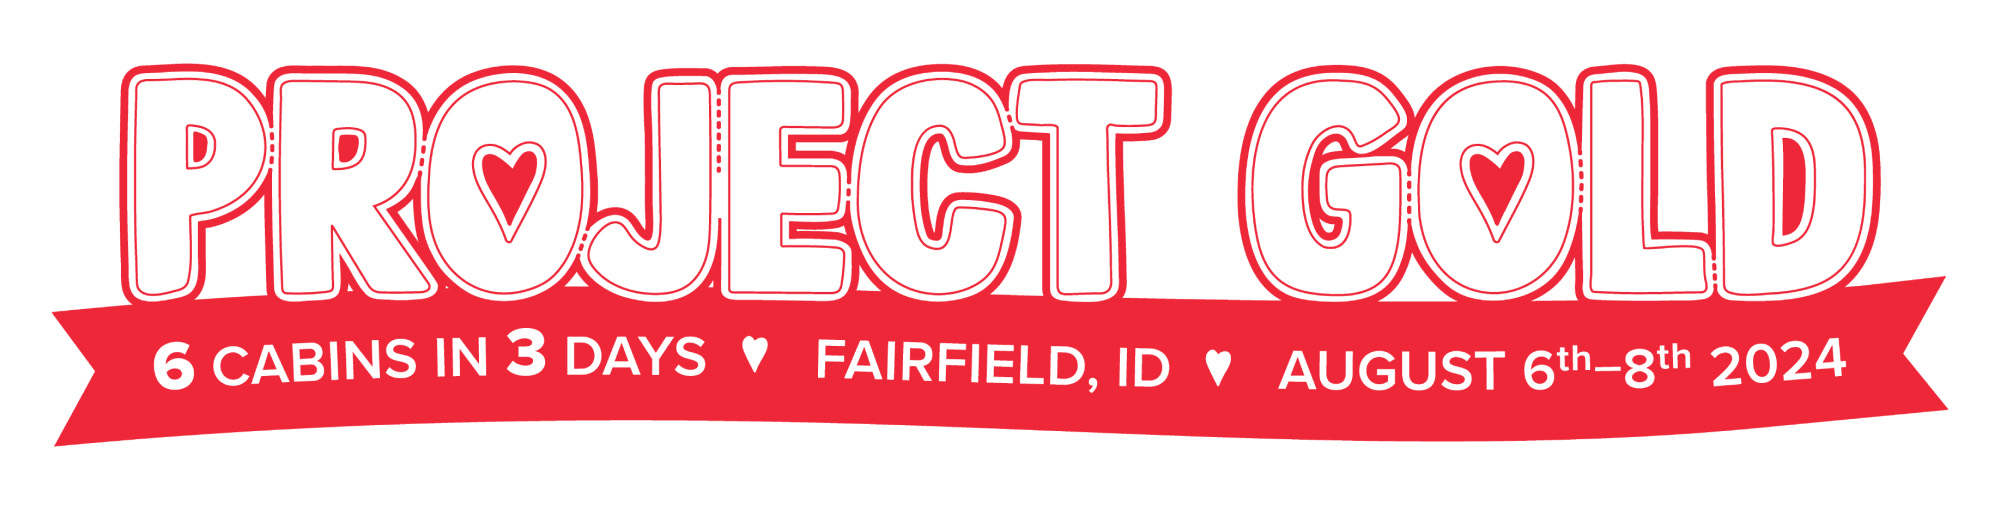 Project Gold 6 cabins in 3 days Fairfield, ID August 6th-9th 2024